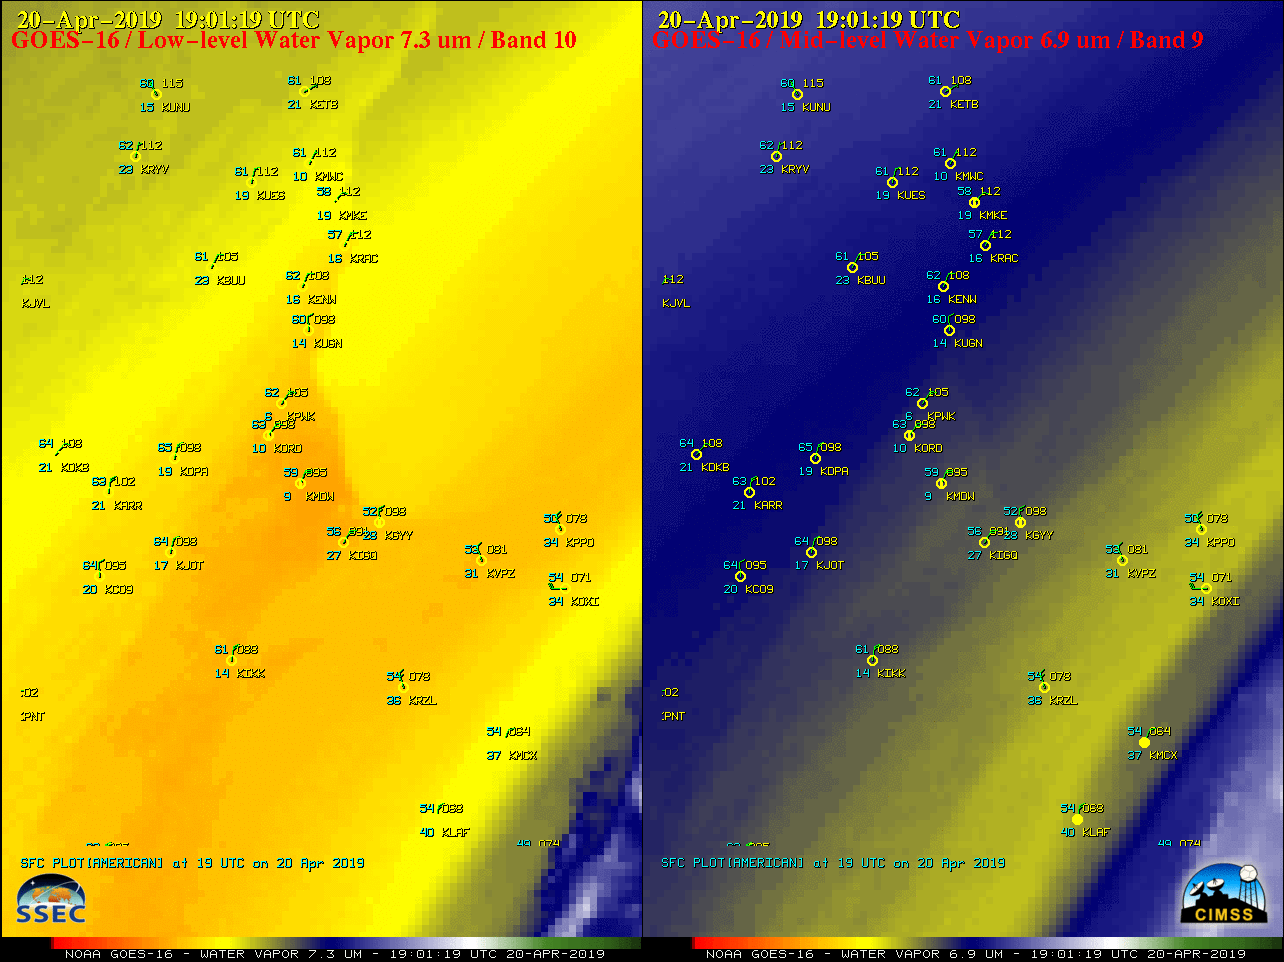 GOES-16 Low-level (7.3 µm, left) and Mid-level (6.9 µm, right) Water Vapor images [click to play animation | MP4]